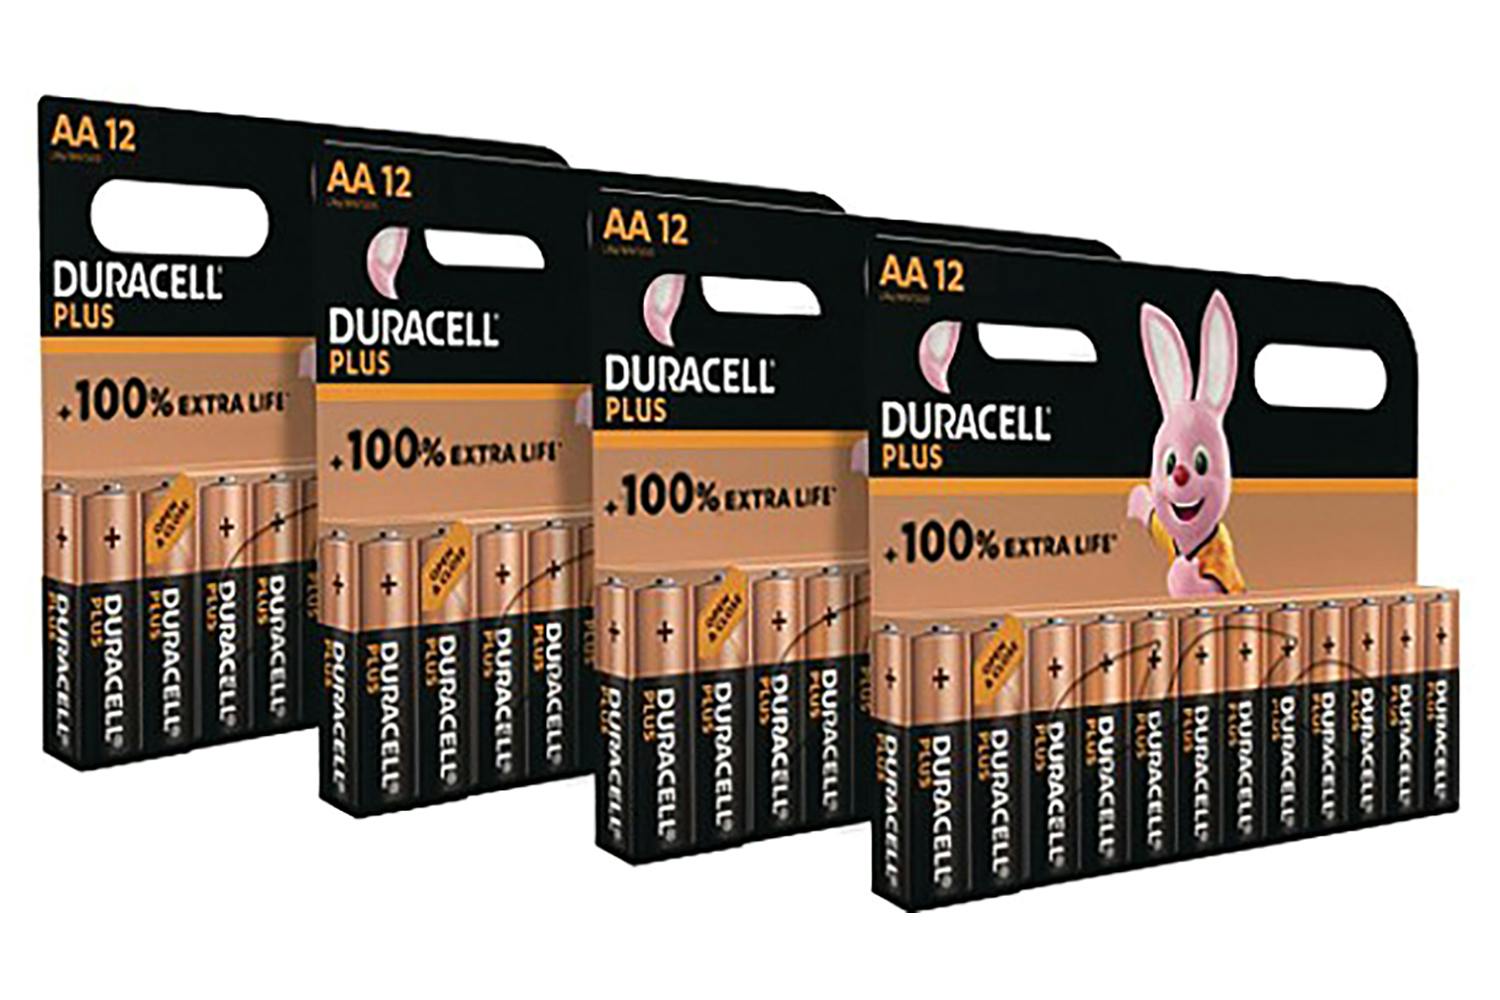 Duracell Plus AA Alkaline Battery | Pack of 48